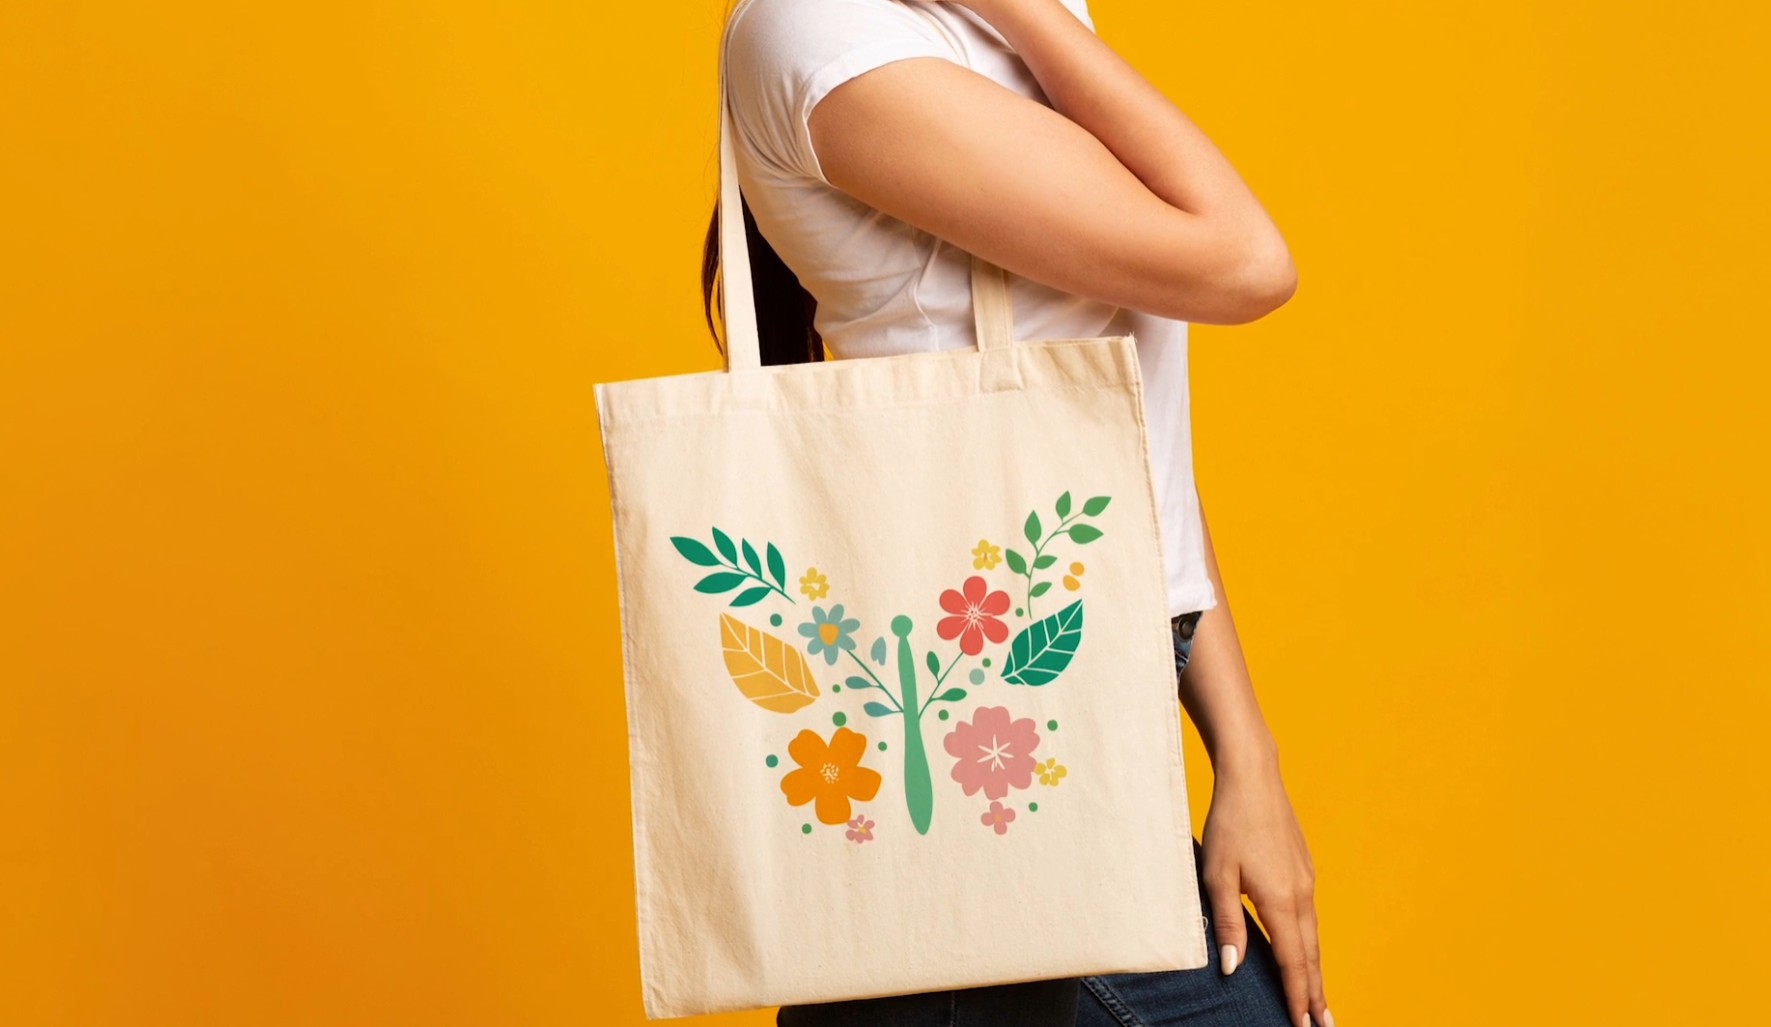 A graphic shown on a bag.